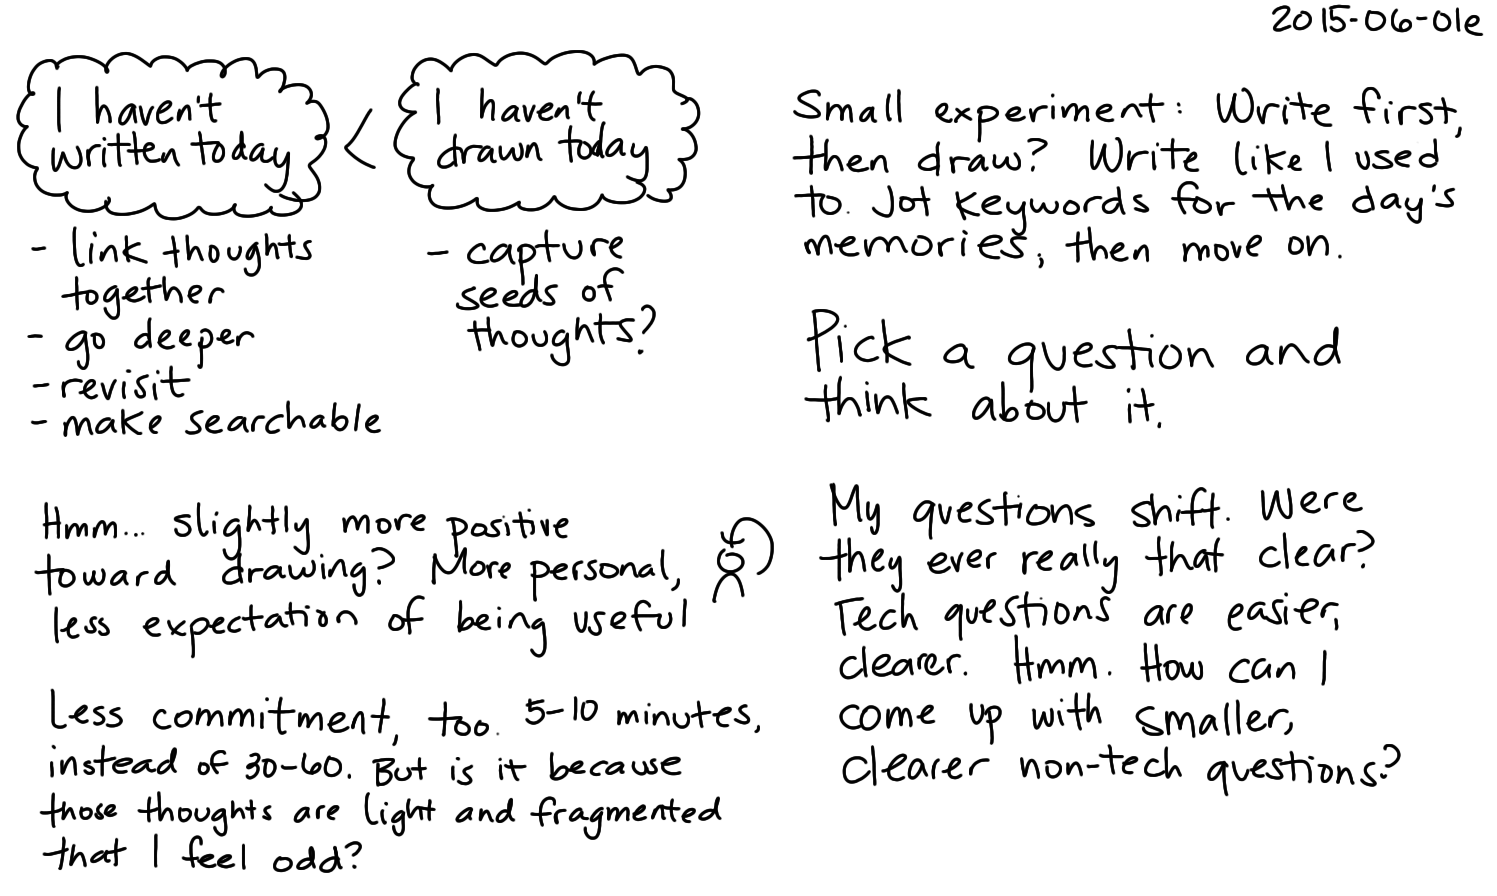 2015-06-01e Fragmented writing and drawing -- index card #fuzzy #fatigue #writing #drawing #fragmentation.png